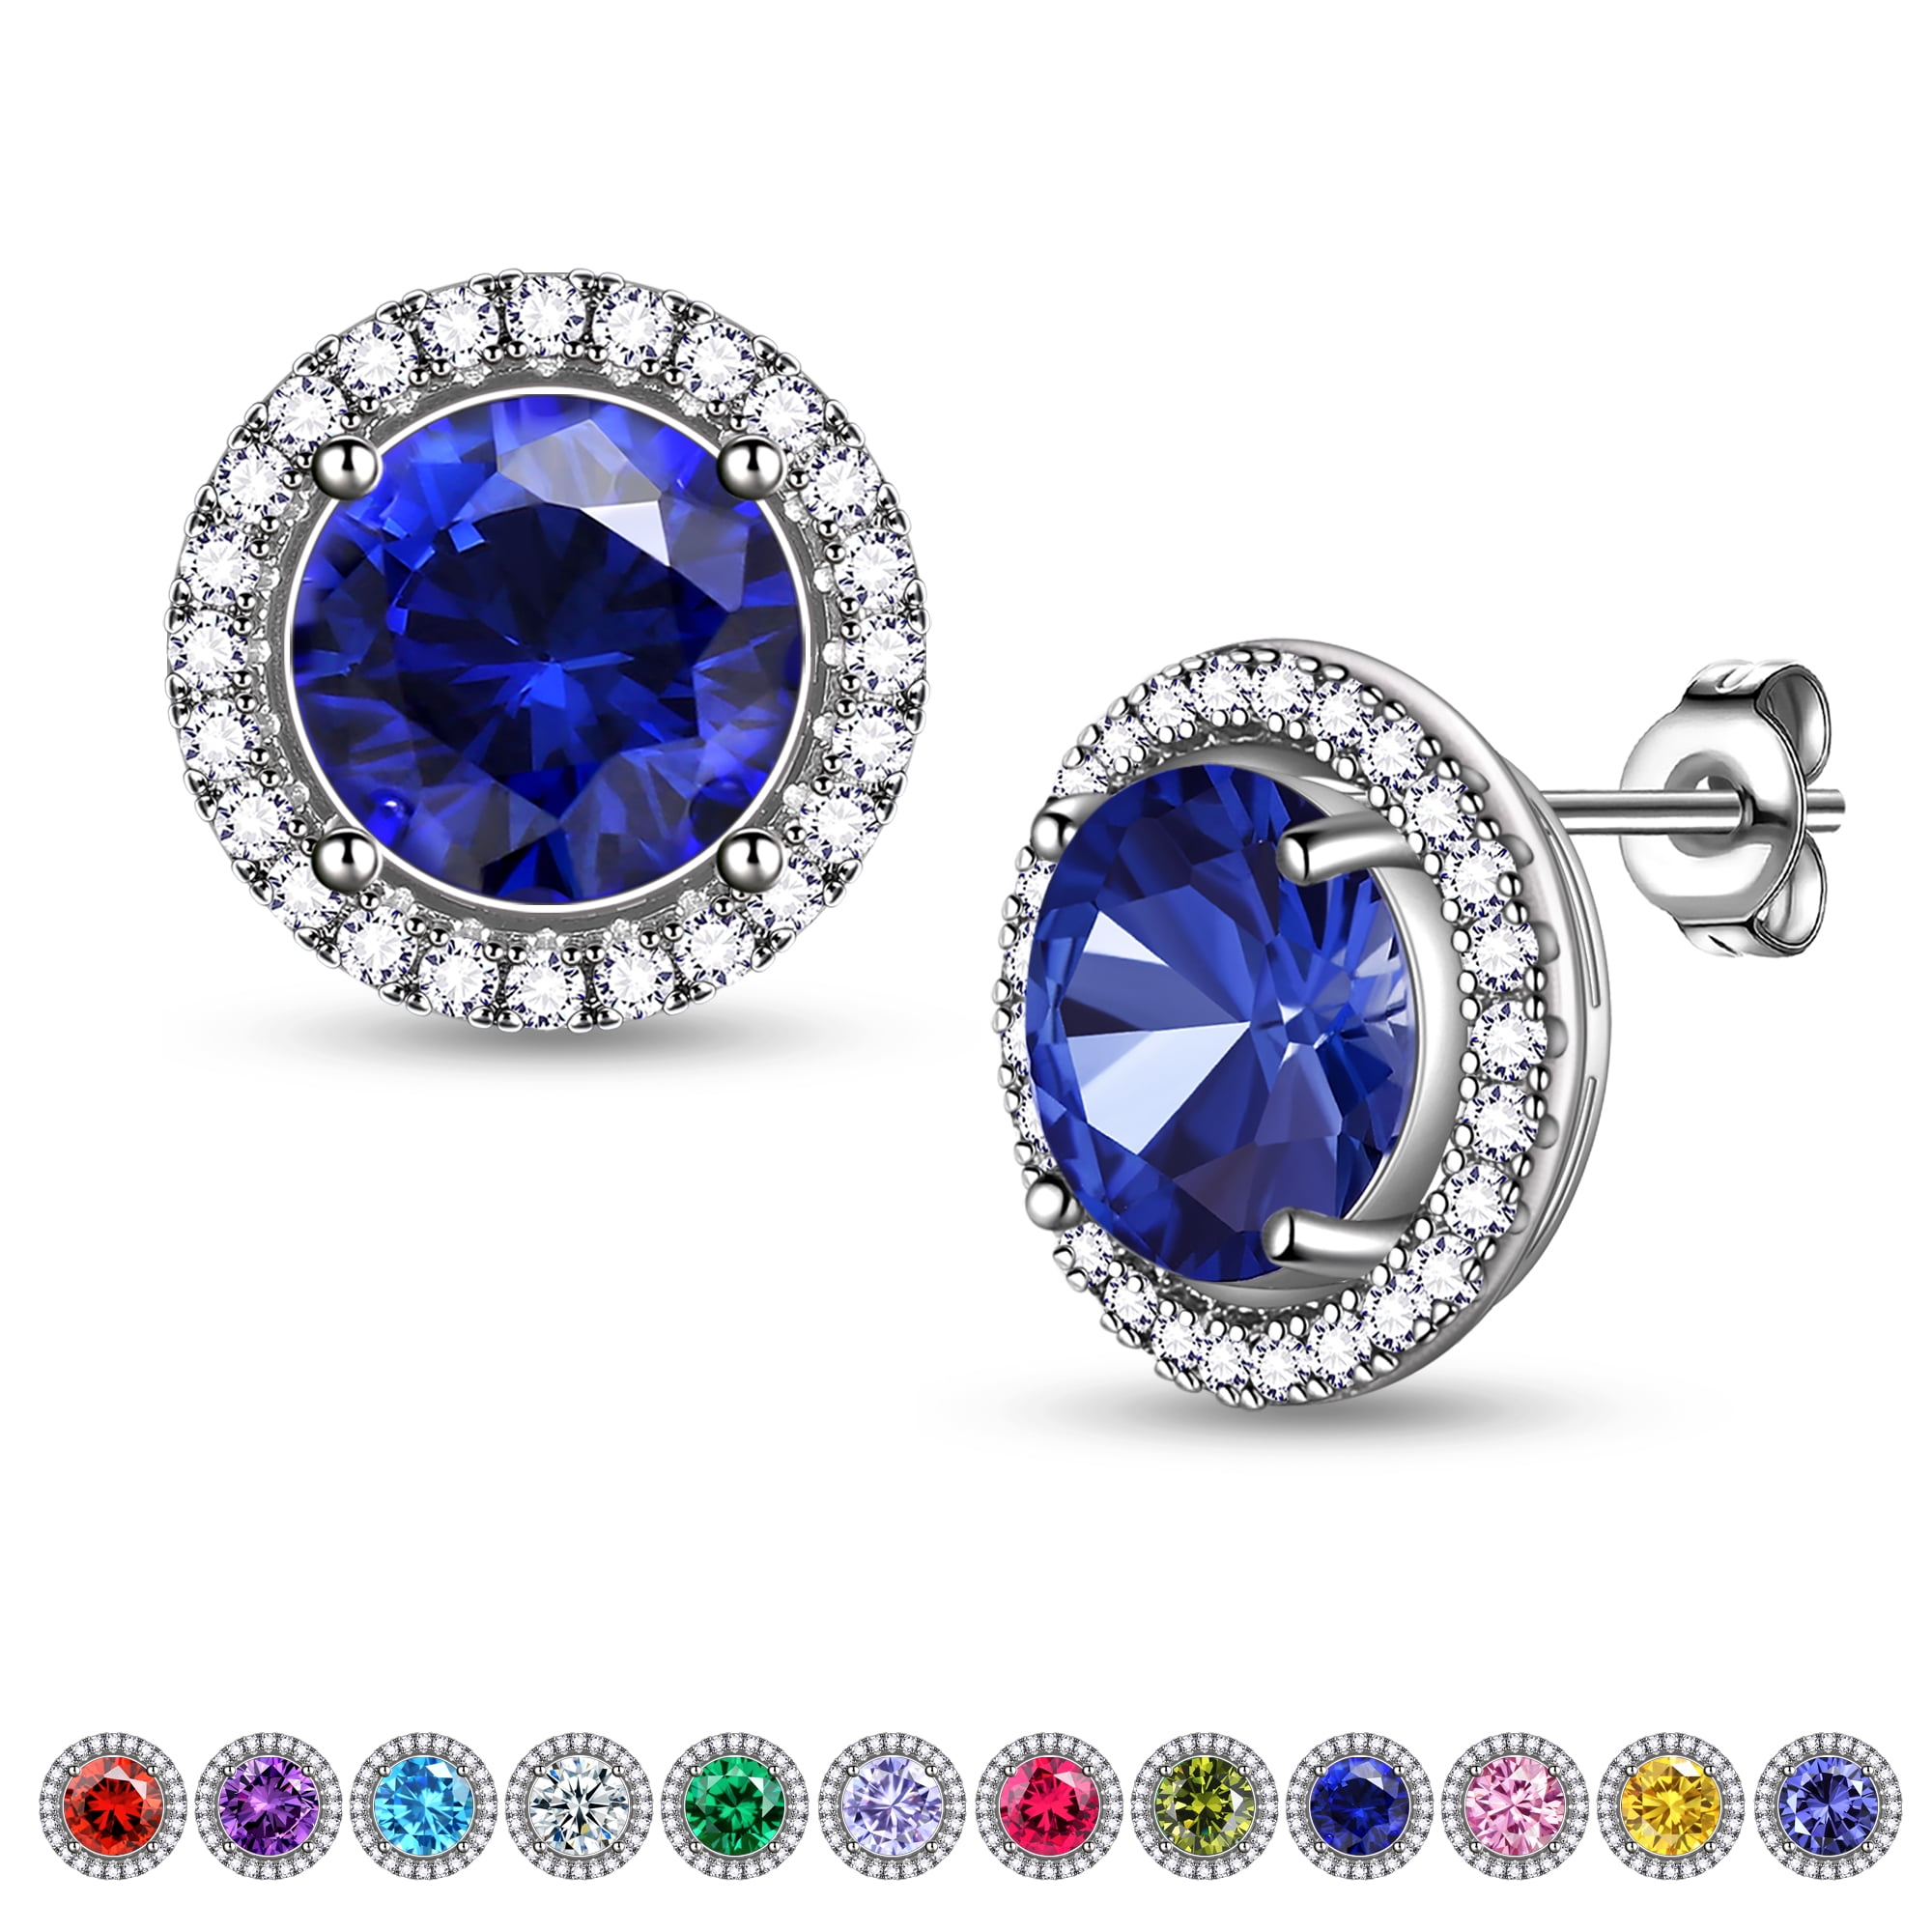 Beautlace Birthstone Stud Earrings Silver Plated Round Shape Birthstone Earrings Bridal Jewelry Birthday Gifts for Girls and Women a623b64e 728a 44d0 92ae 89a0deffe77e.1e7136e2516fdcb91a9dcf9ae119f6aa